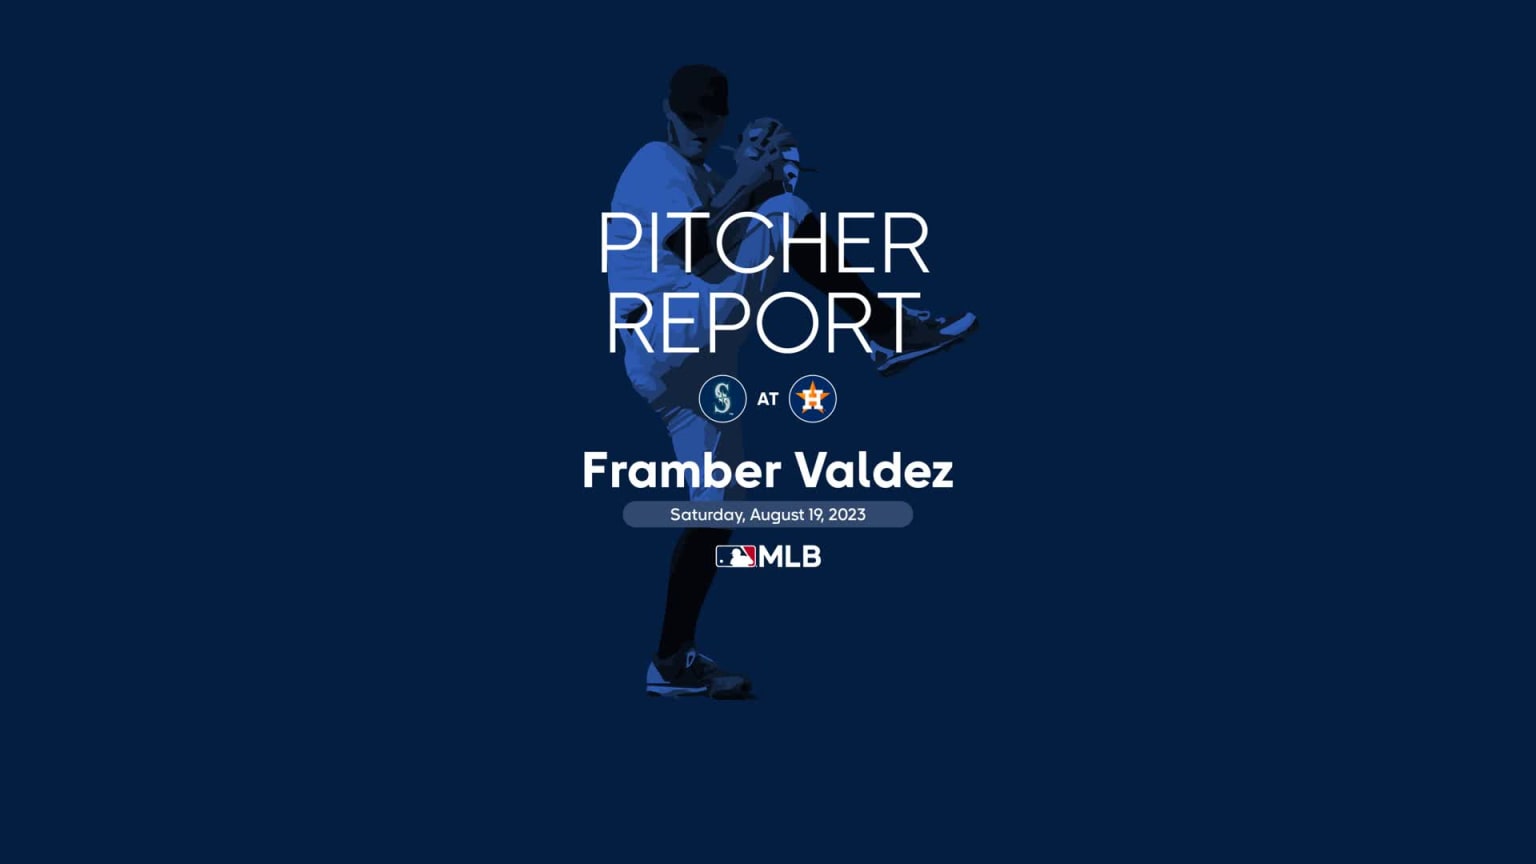 Framber Valdez's outing against the Mariners